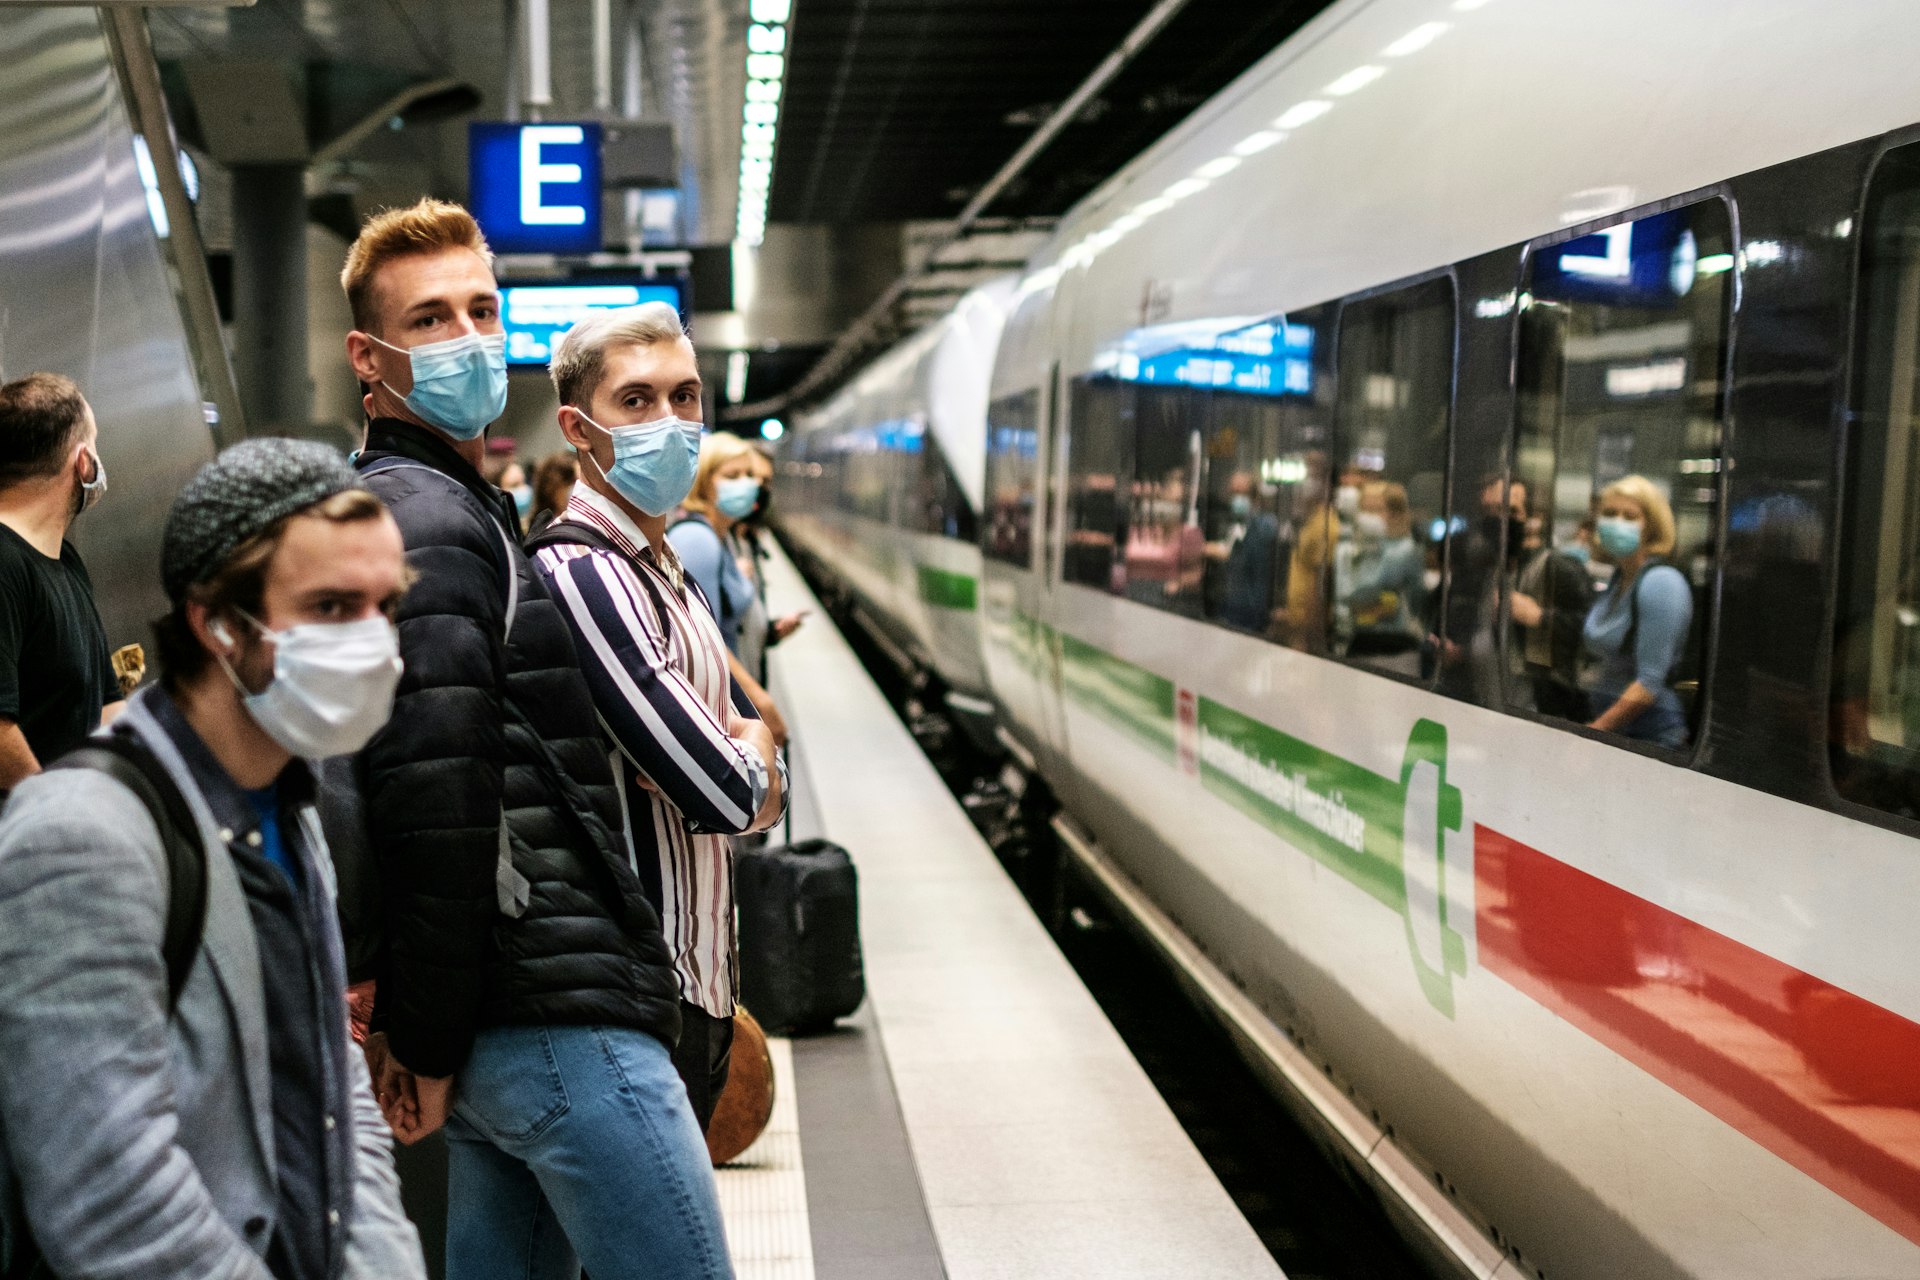 People wearing mask waiting for ICE train on platform at station (Berlin Hauptbahnhof).